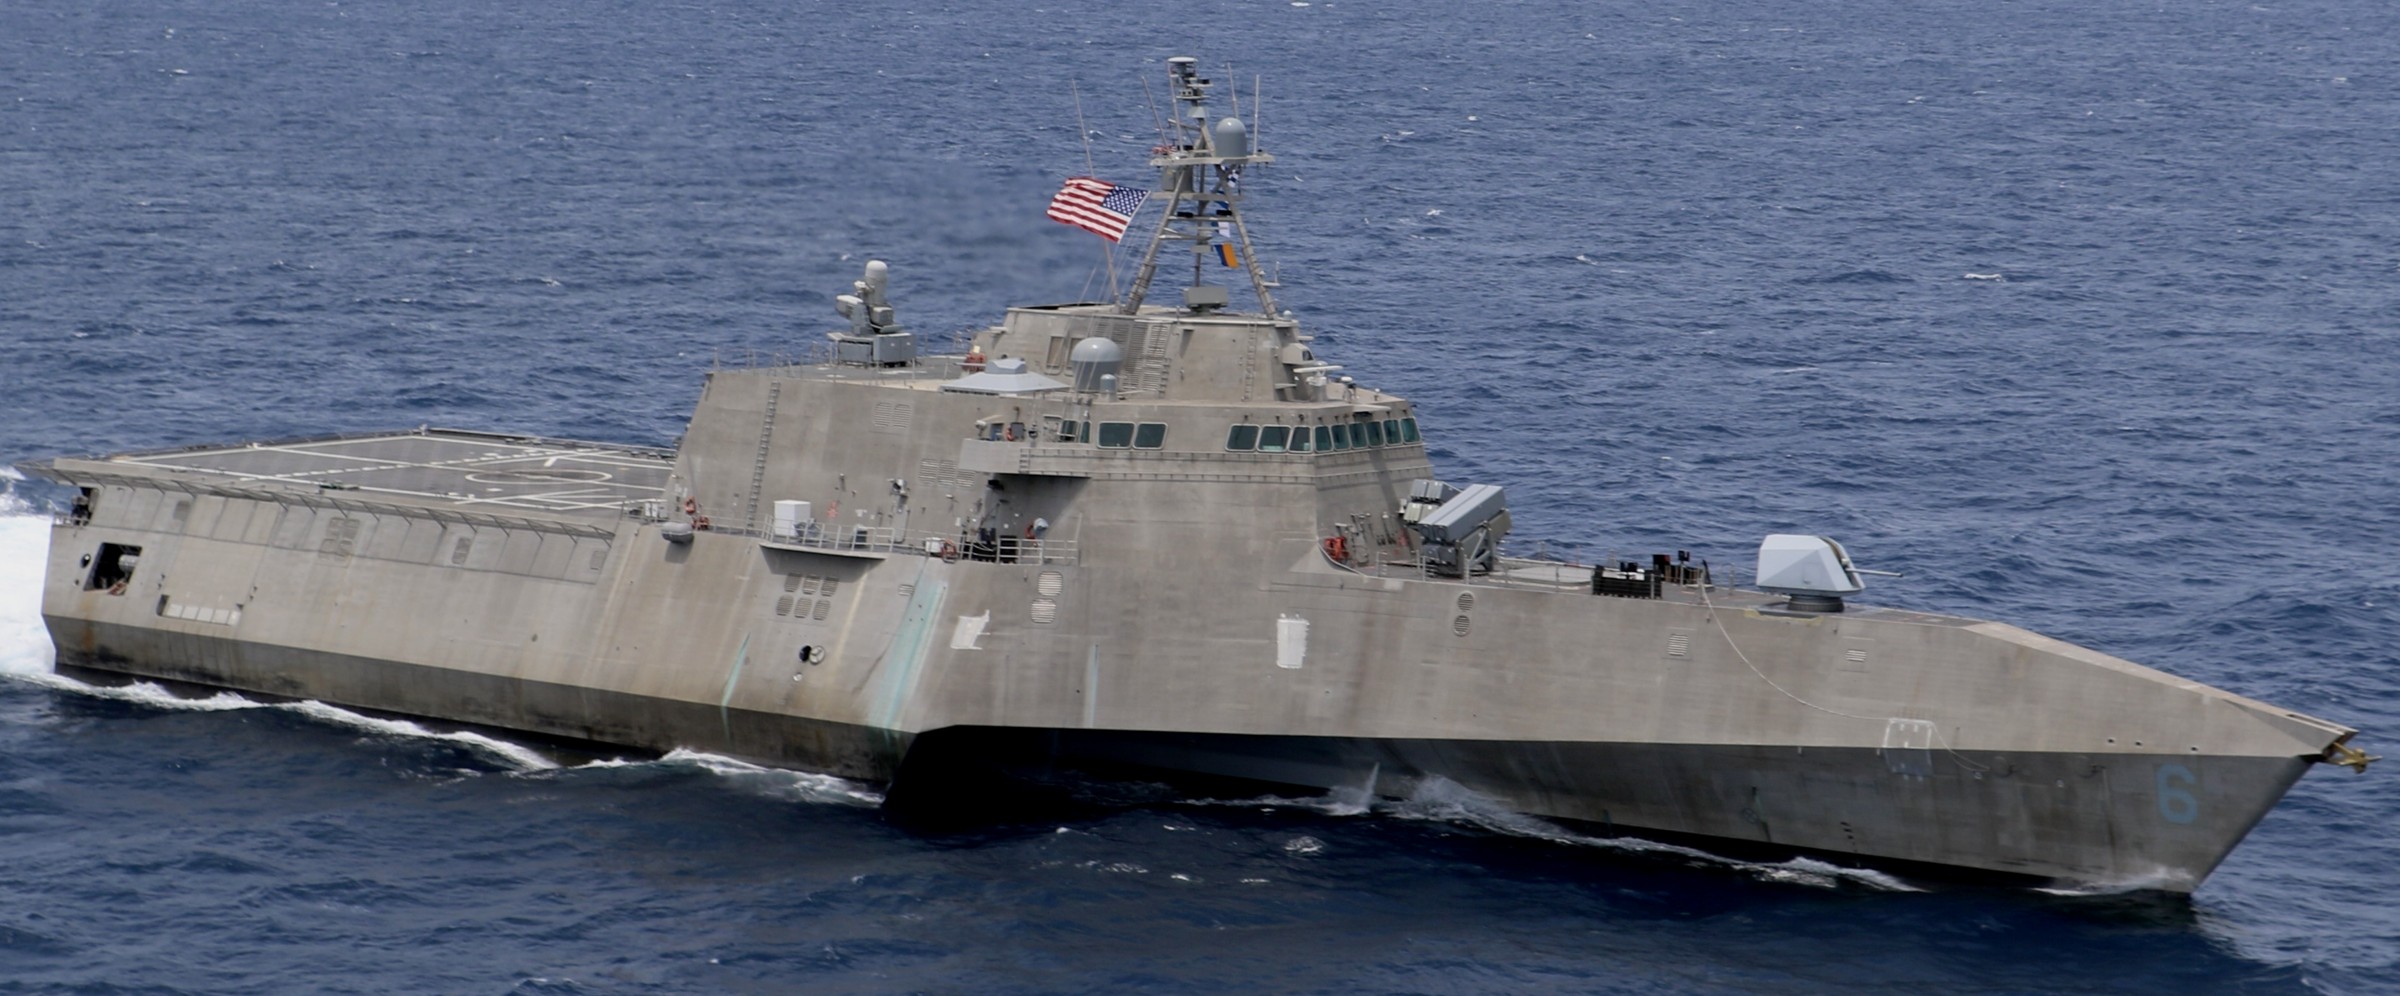 lcs-6 uss jackson independence class littoral combat ship us navy gulf of thailand 52